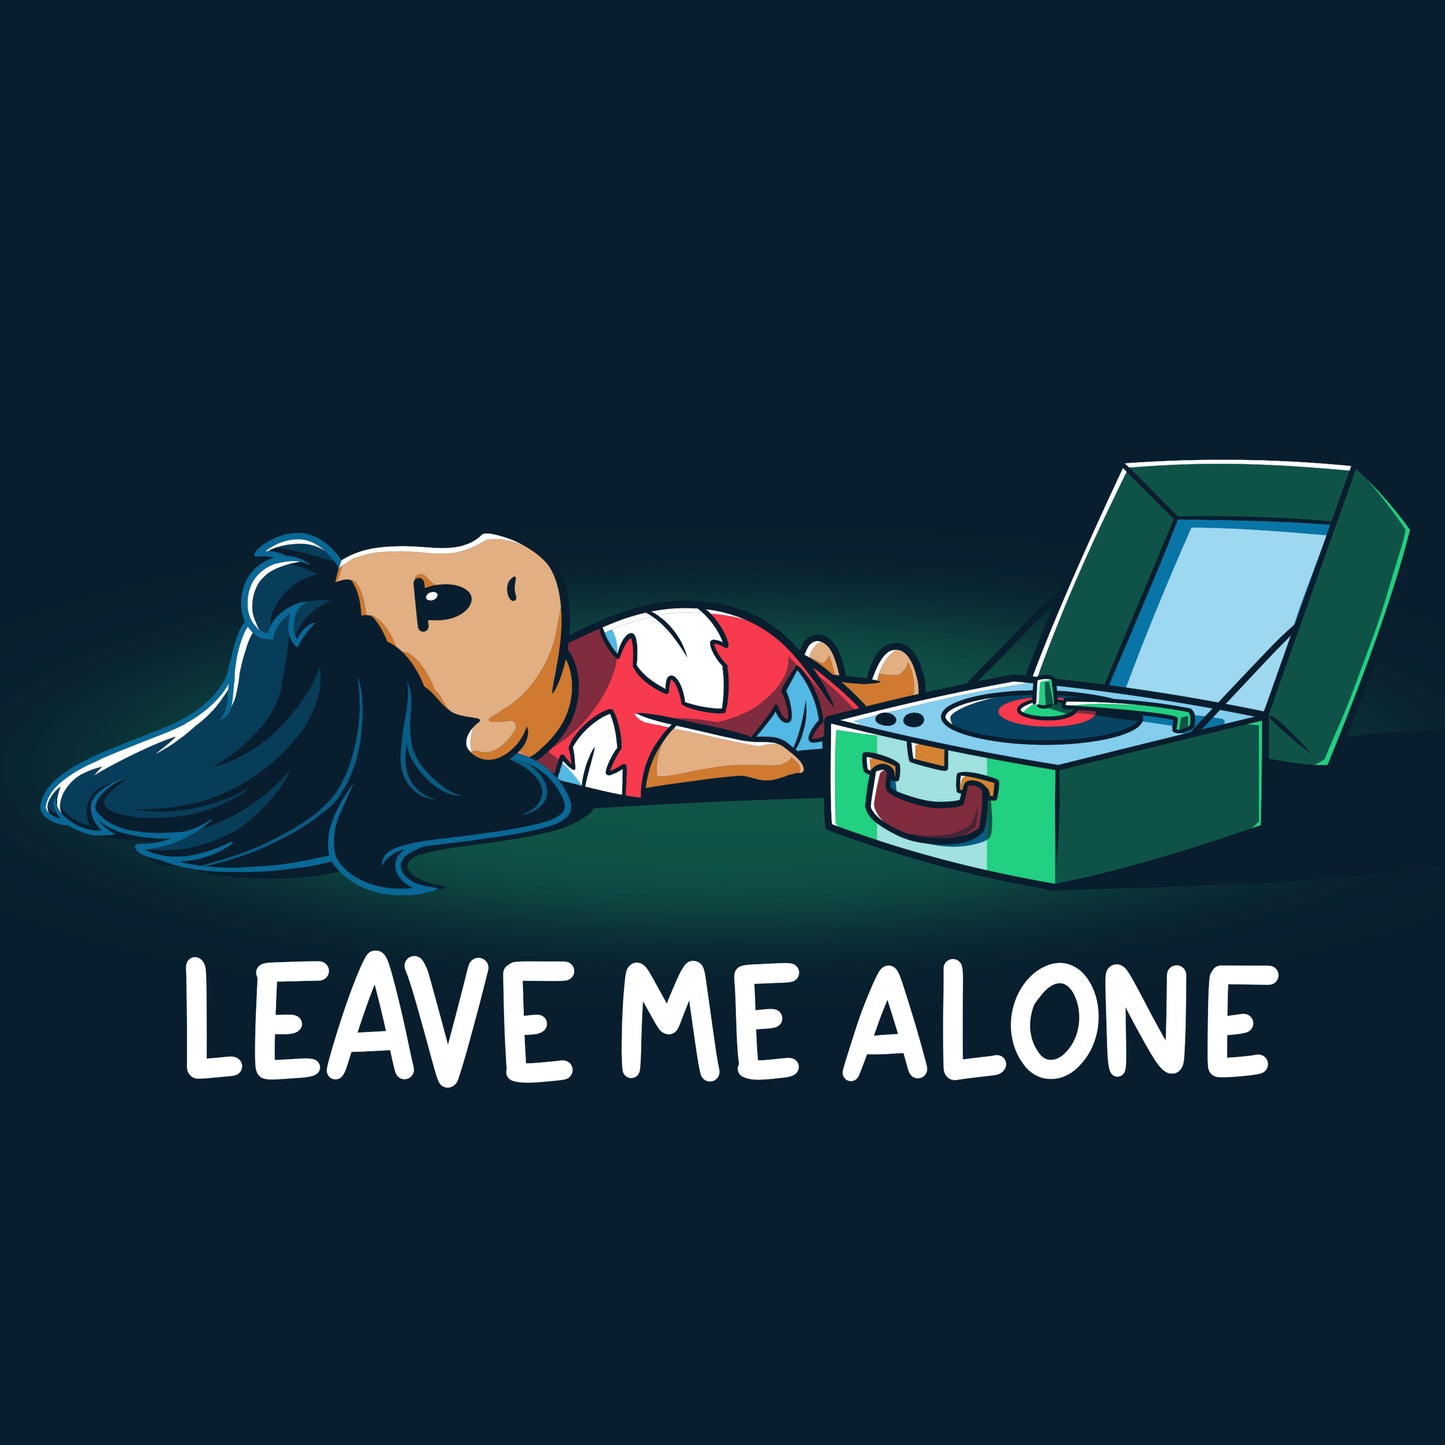 Officially licensed Disney Lilo & Stitch "Leave Me Alone" tee.